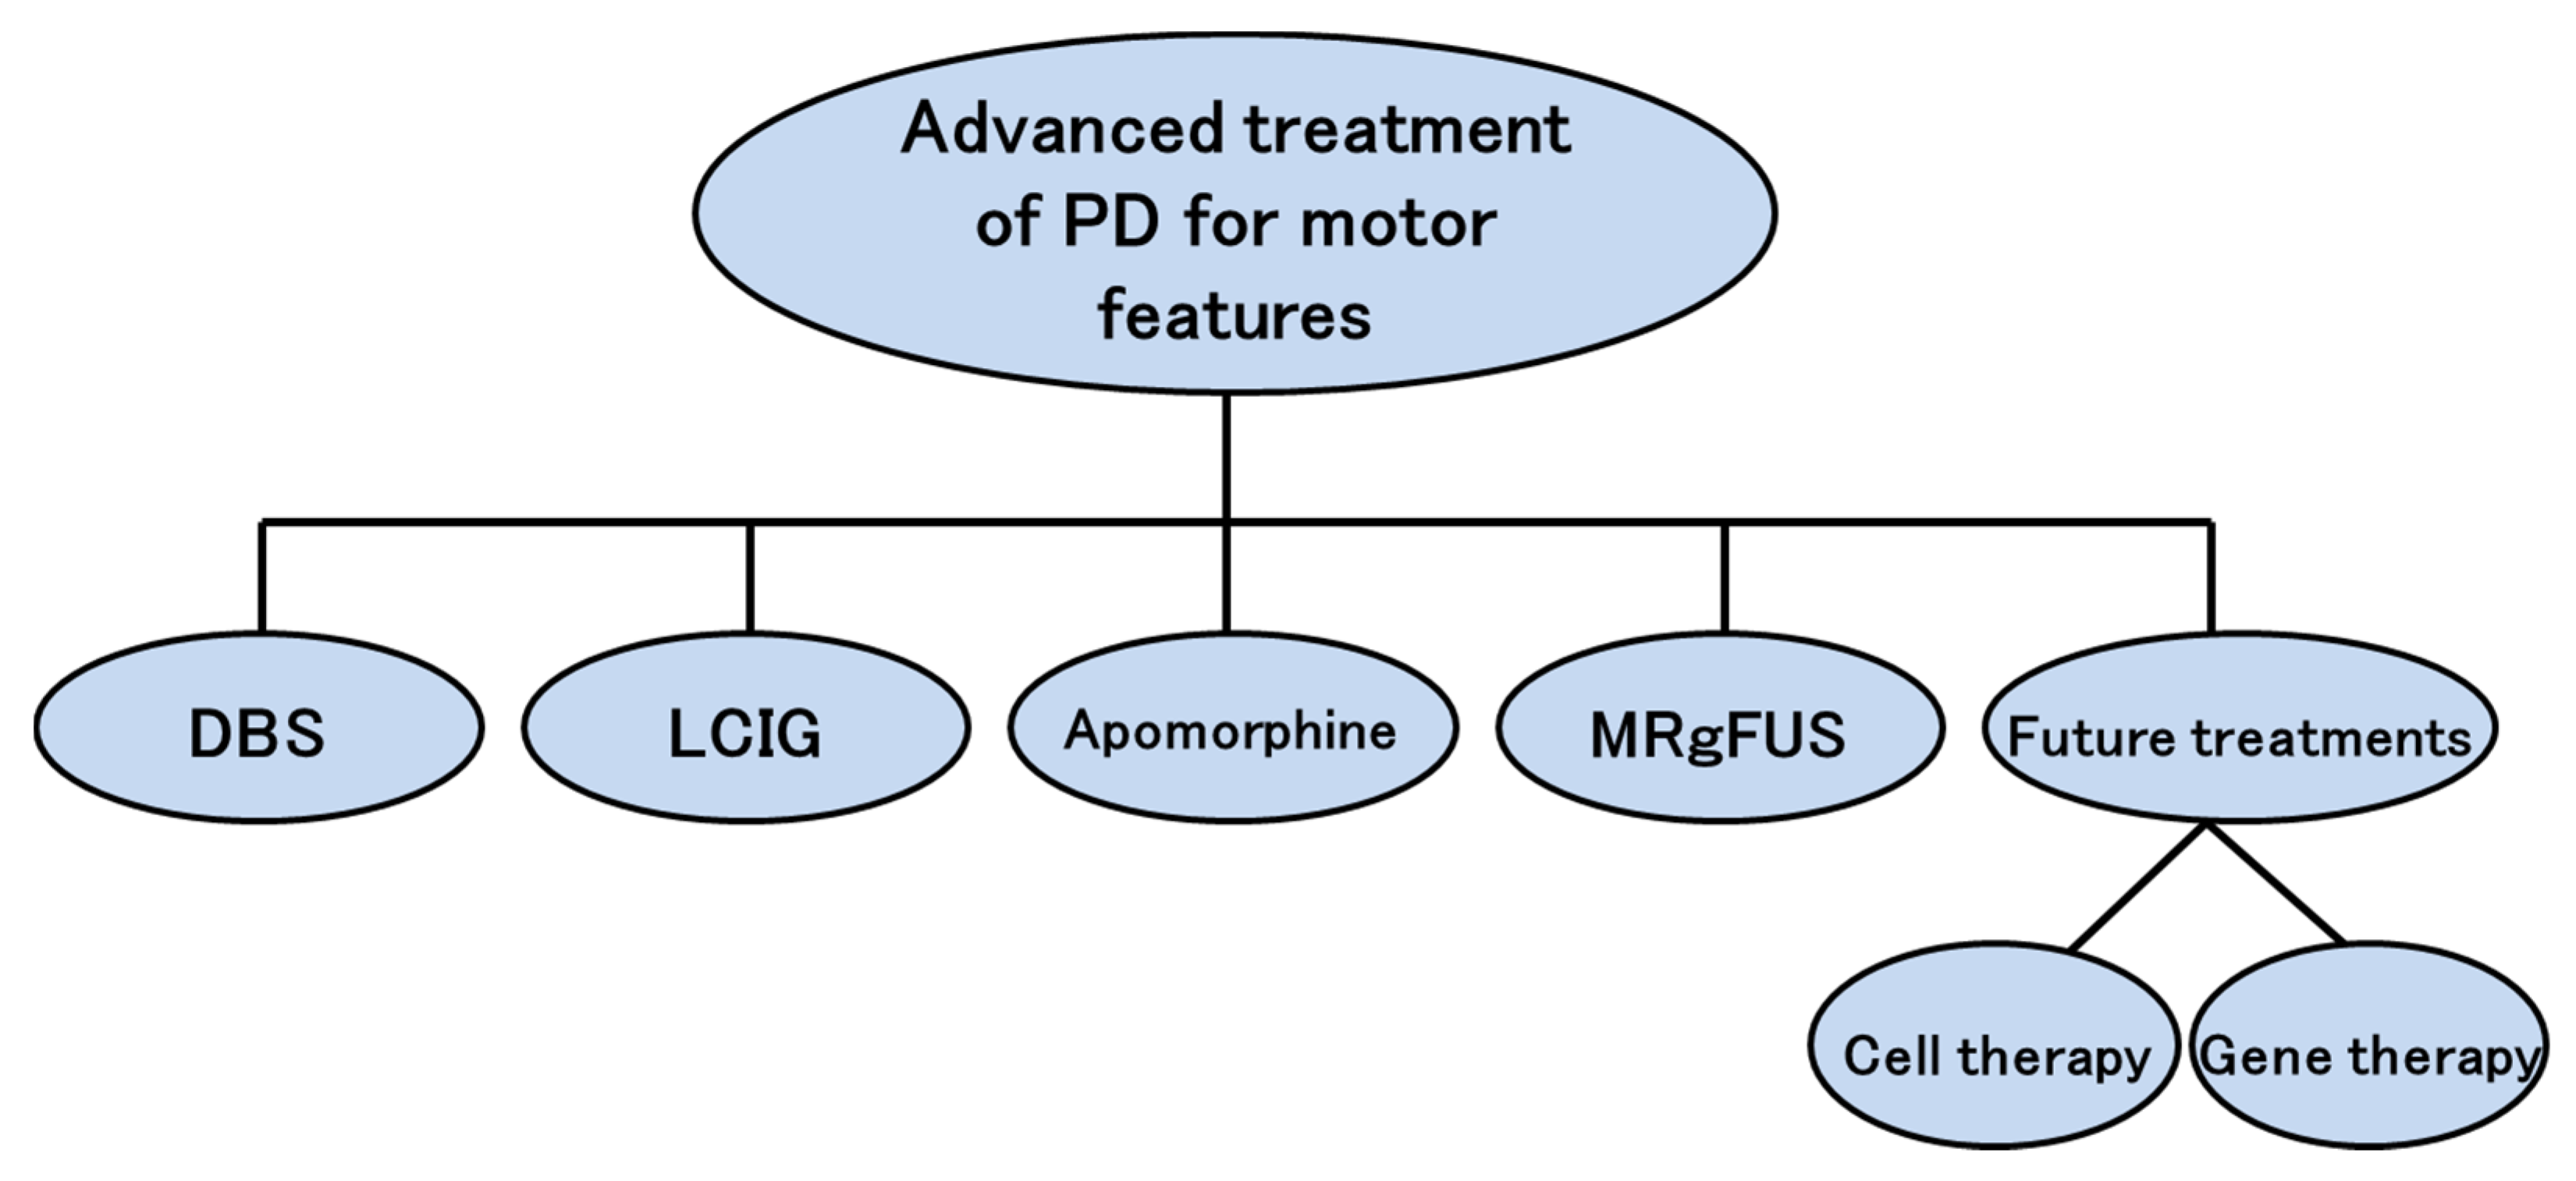 JPM | Free Full-Text | Personalized Medicine in Parkinson's Disease: New  Options for Advanced Treatments | HTML